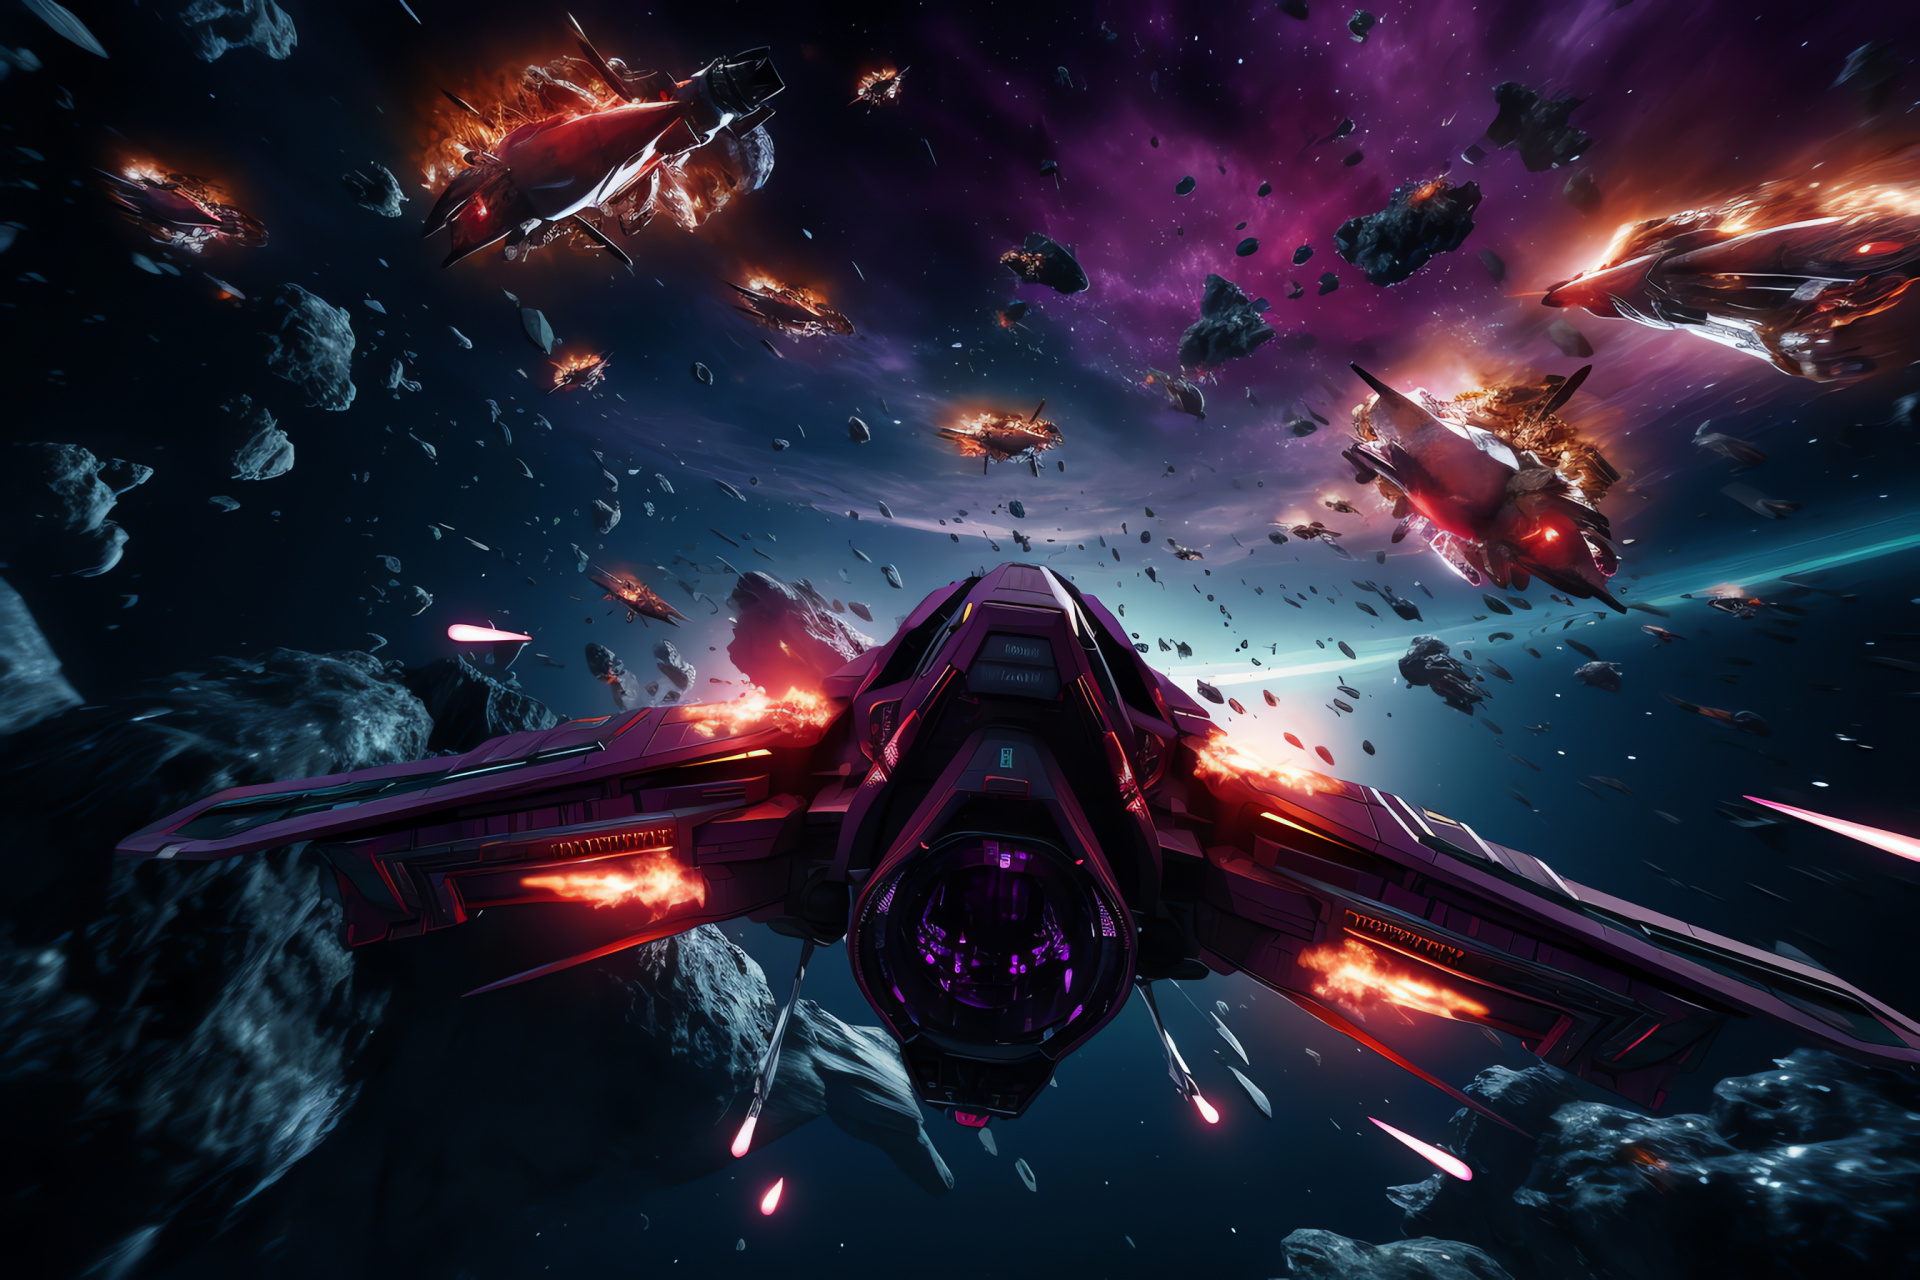 Stellar dogfights, Spacecraft air squadron, Galactic battle dynamics, Intense cosmic confrontation, Deep-space dogfight, HD Desktop Image